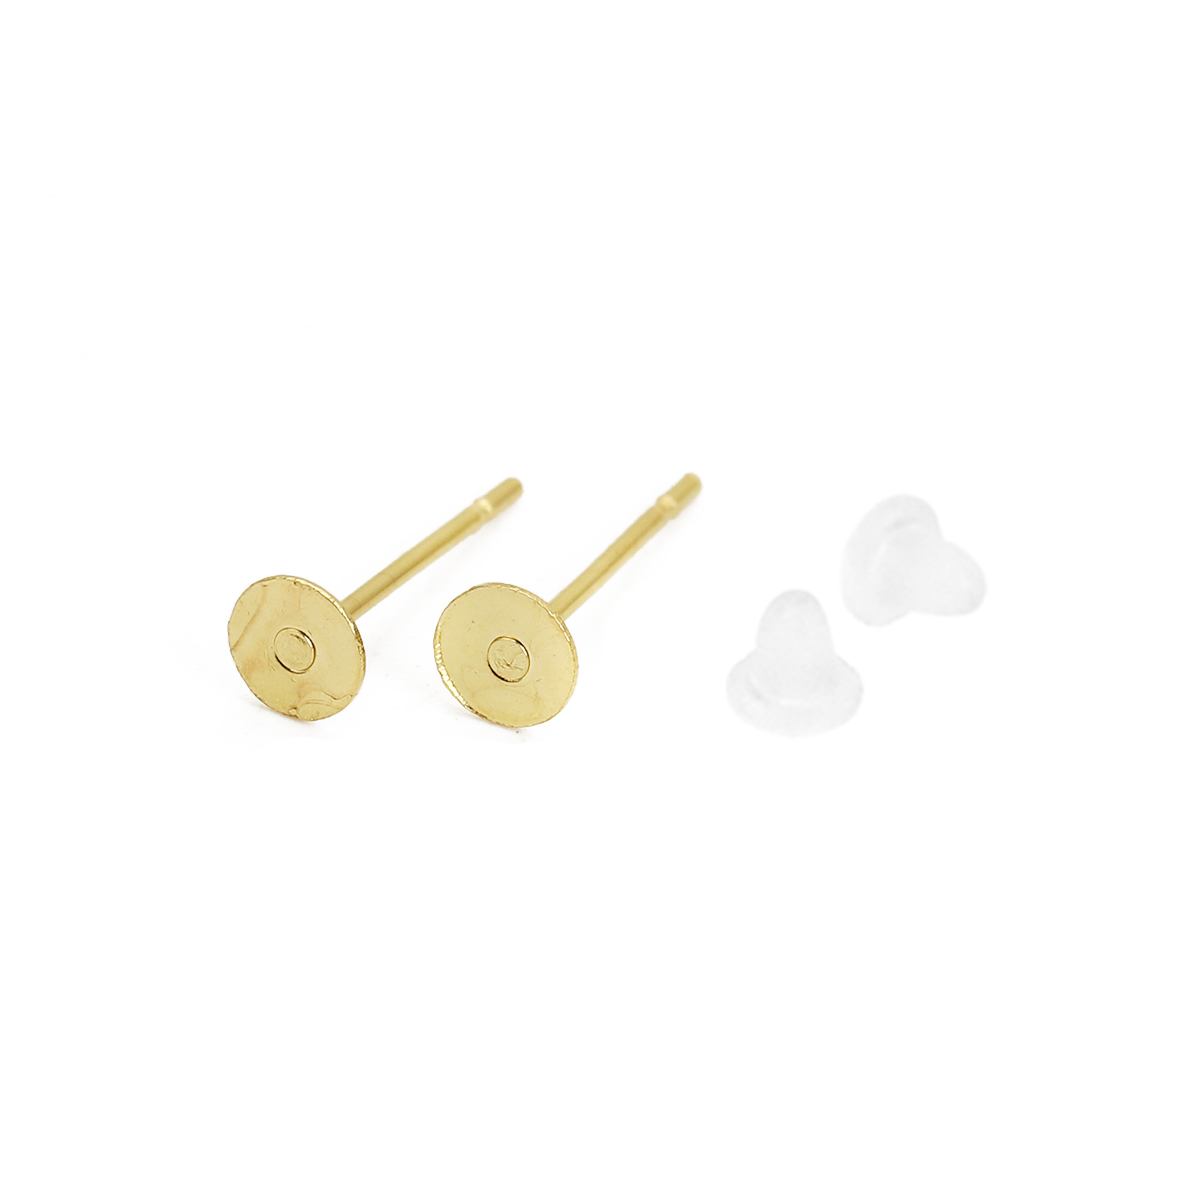 Picture of 304 Stainless Steel Glue-On Ear Post Stud Earrings Round Gold Plated (Fits 4mm Dia.) 4mm( 1/8") Dia., Post/ Wire Size: (21 gauge), 50 PCs